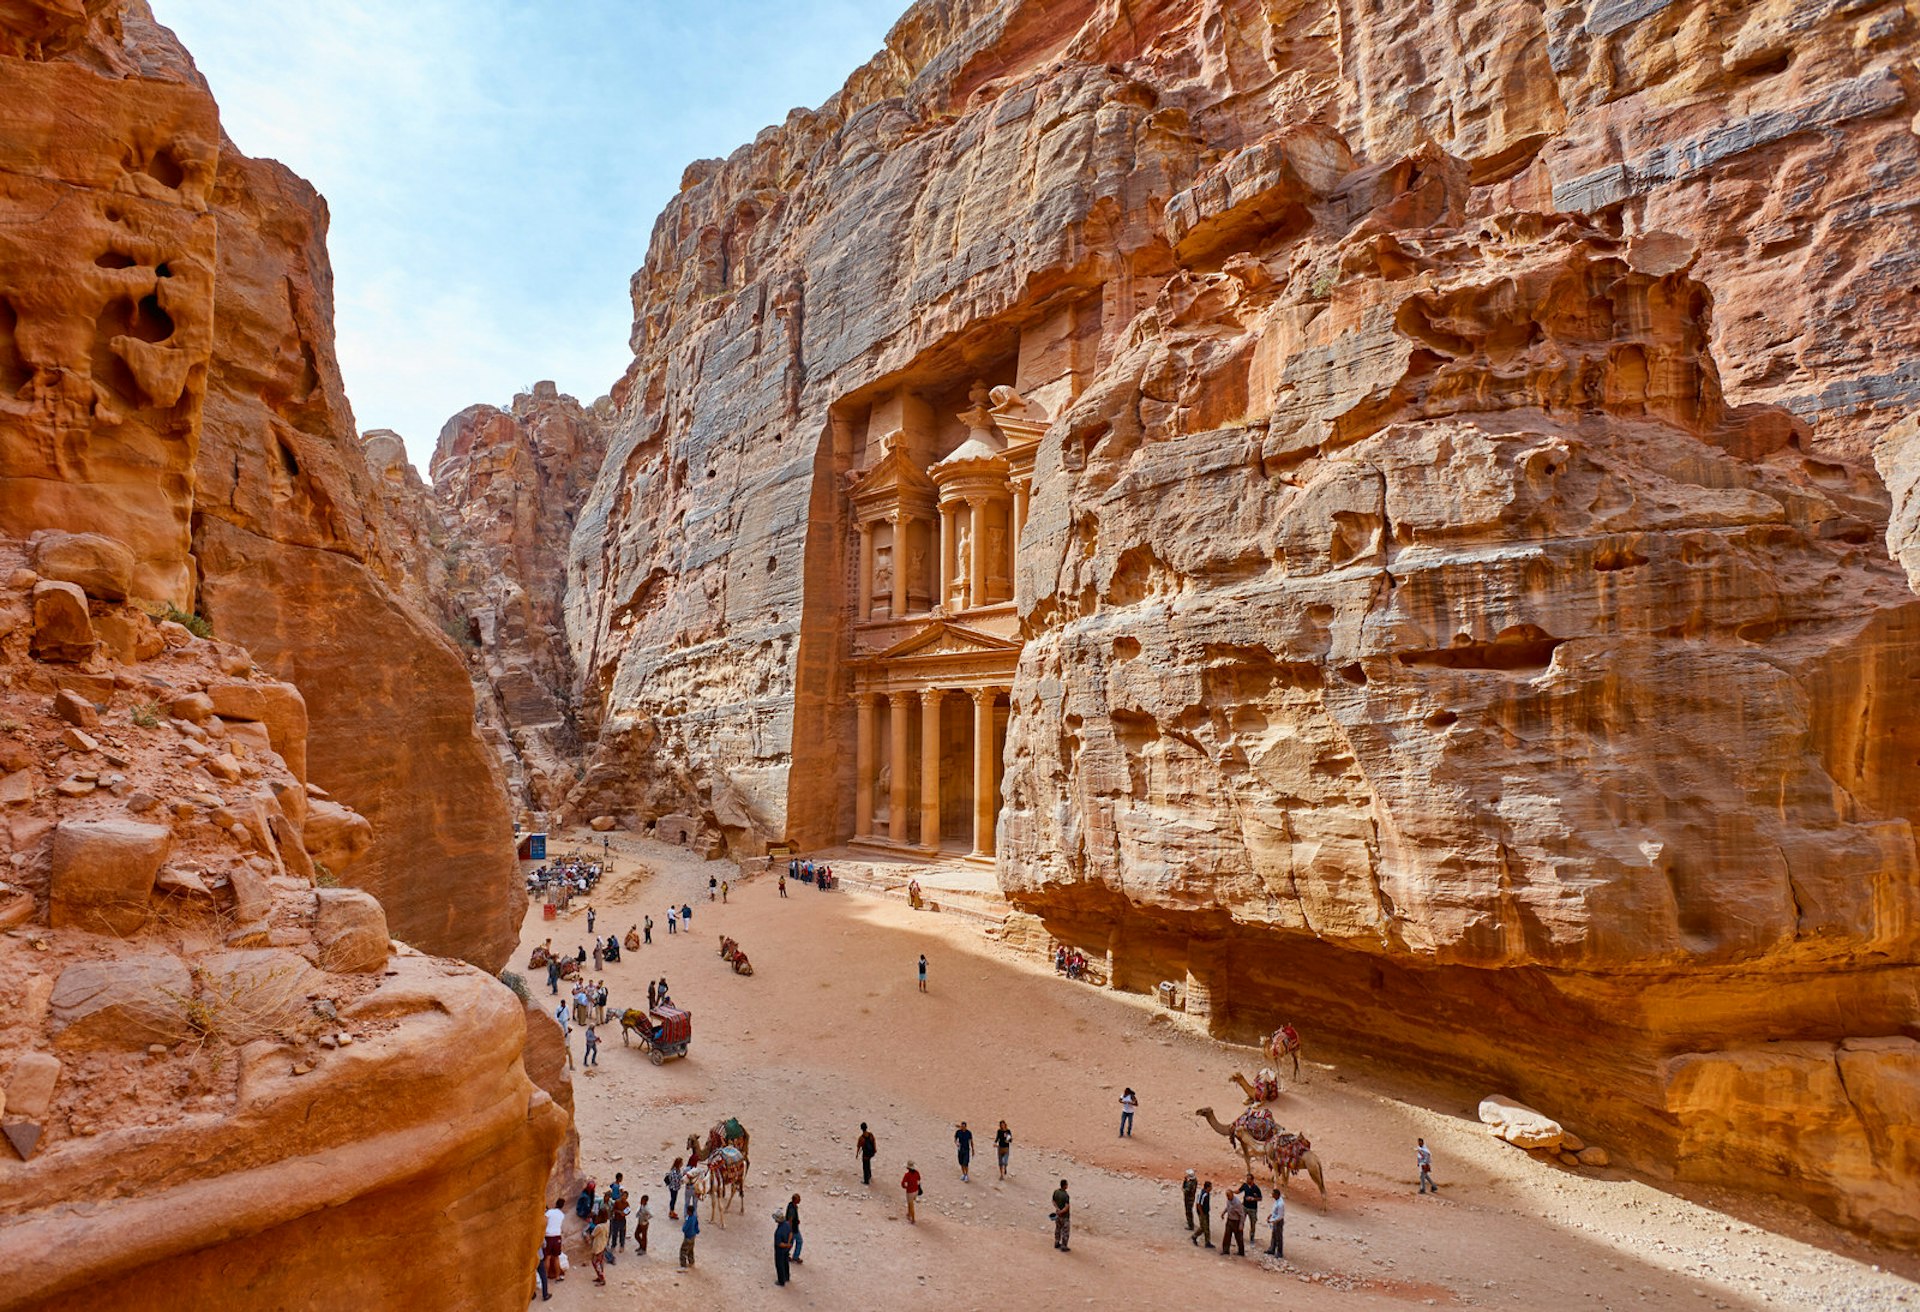 The Treasury in the ancient city of Petra in Jordan